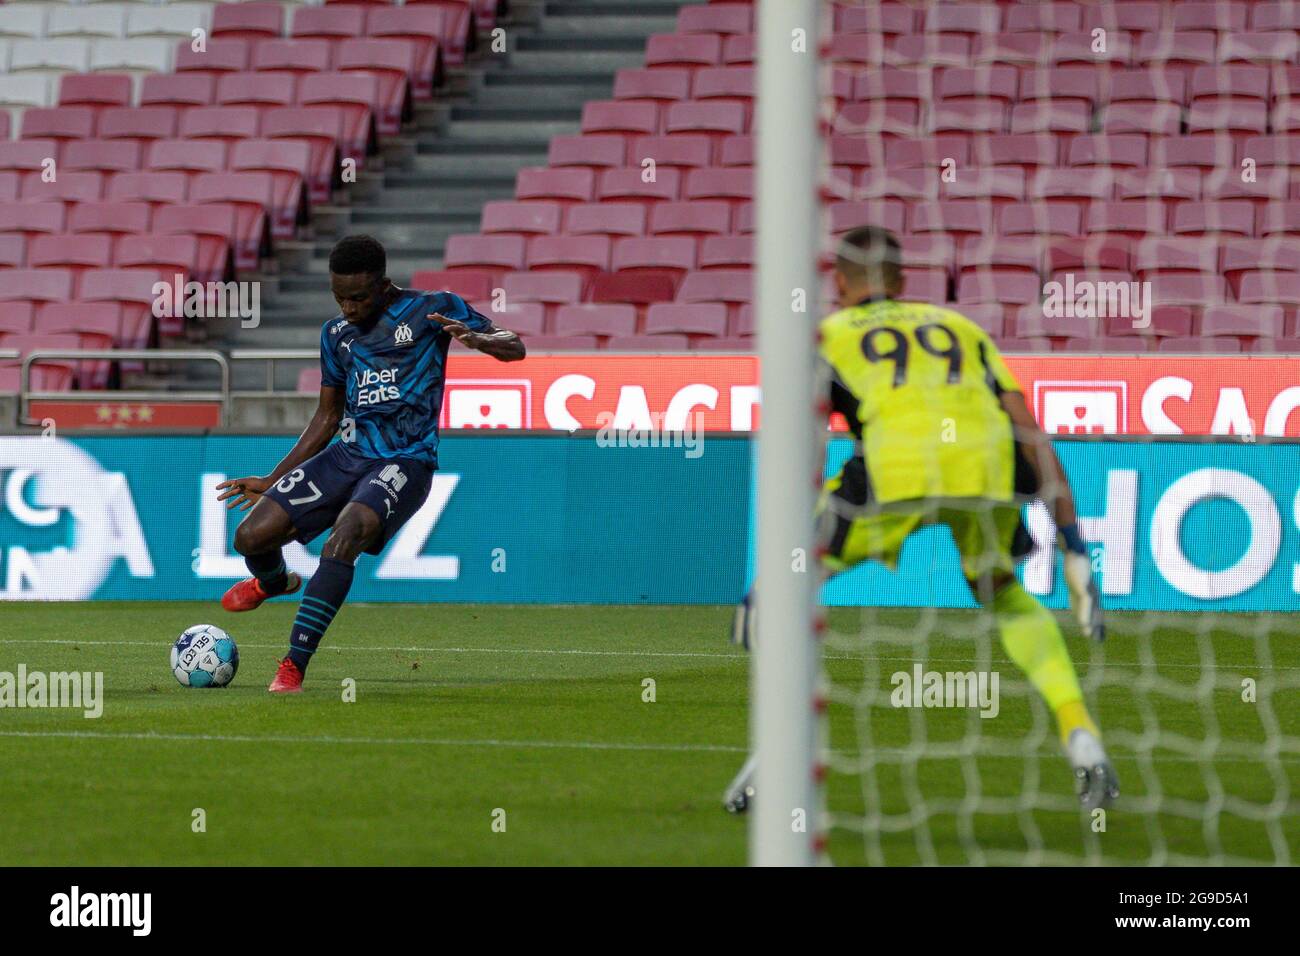 July 25, 2021. Lisbon, Portugal. Marseille's forward from Senegal Bamba Dieng (37) in action during the friendly game between SL Benfica vs Olympique Marseille Credit: Alexandre de Sousa/Alamy Live News Stock Photo